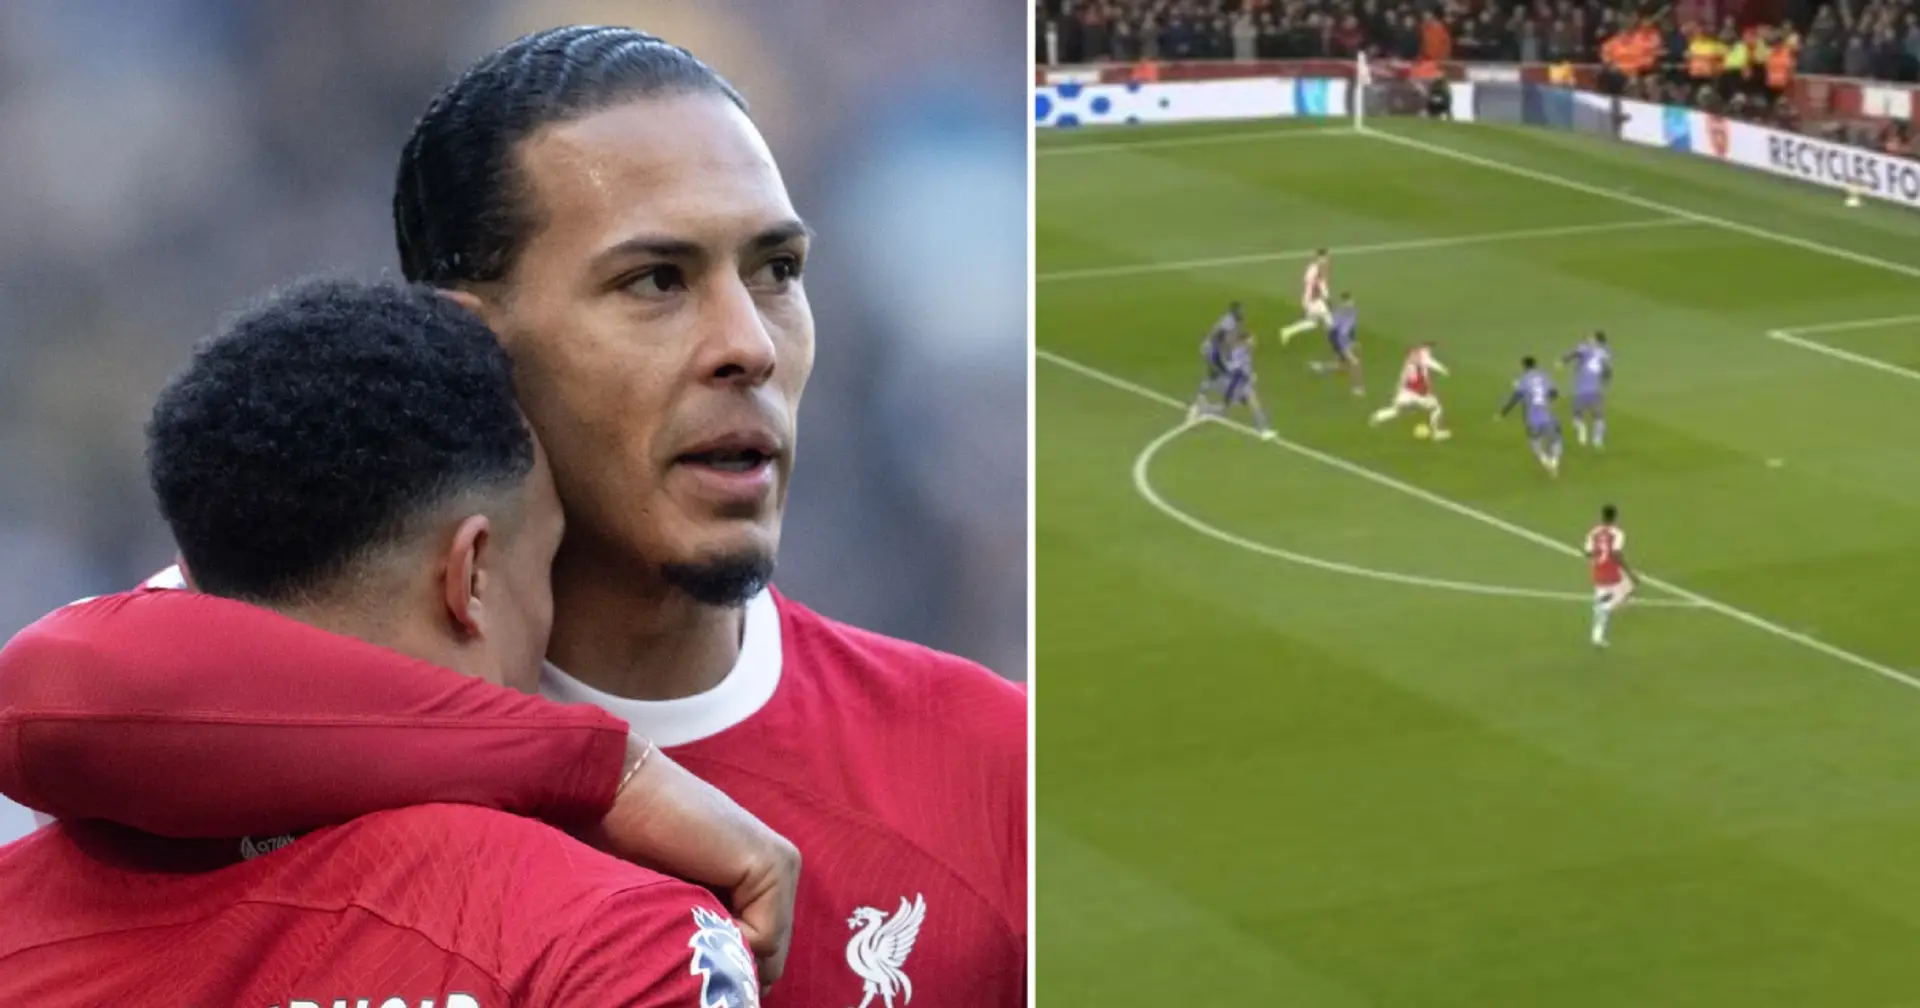 'Safe to say we haven't started yet': fans react as Van Dijk bails Trent out with a vital block